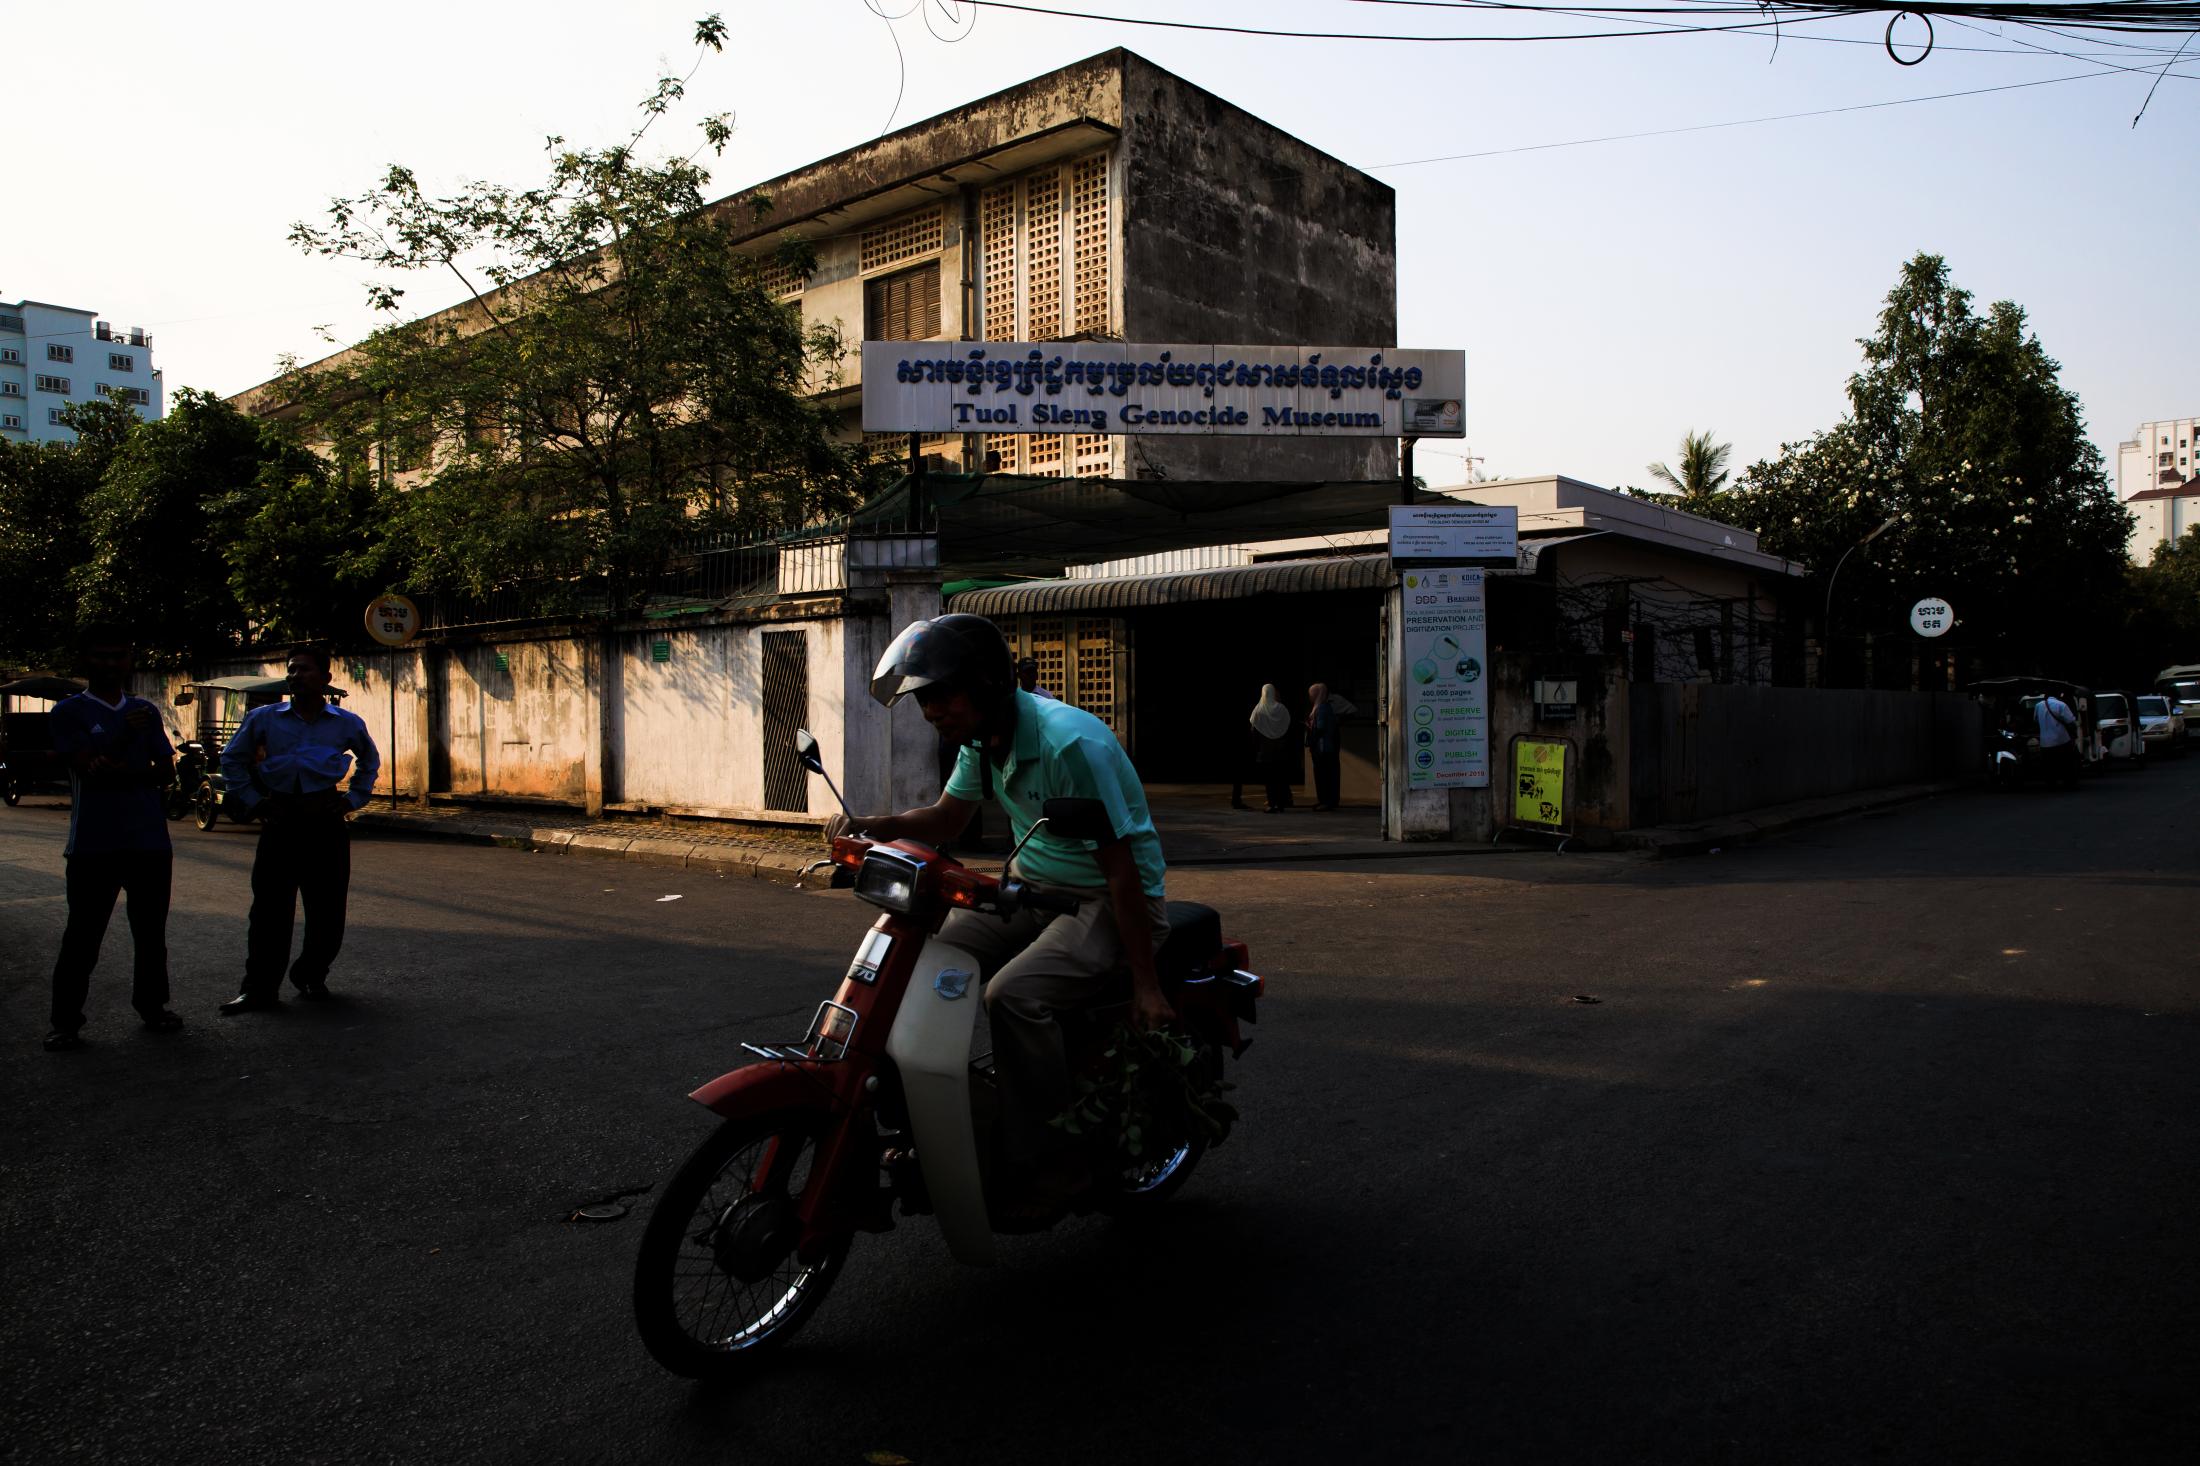  A man drives his motorcycle in front of Tuol Sleng prison, known as S-21, an old school in Phnom Penh. Inside the prison, formerly run by &quot;Duch&quot;, between twelve and twenty thousand people, of which at least 89 were children, were arrested. The prison was used to forces declarations and confessions throughout the prisoner&#39;s torture. Between April of 1975 and January of 1979, the Khmer Rouge regime was responsible for the death of about 2 million people in Cambodia, in one of the most lethal regimes of the 20th century. 2019 marked the 40th anniversary of the fall of the Khmer Rouge regime. Phnom Penh, Cambodia. 